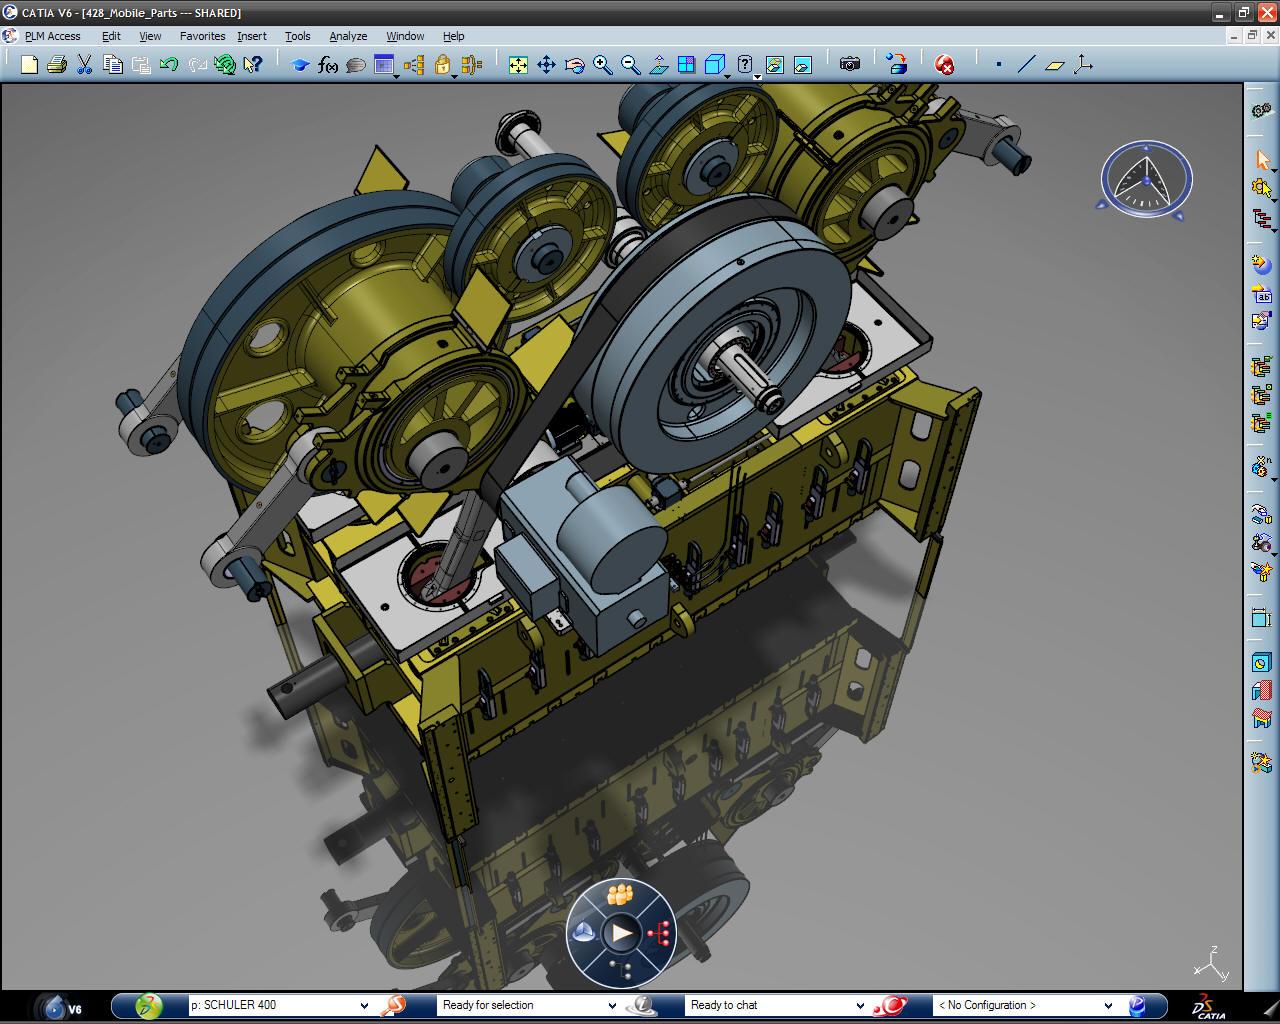 CATIA high capability of assembly to huge and complex parts and testing animations